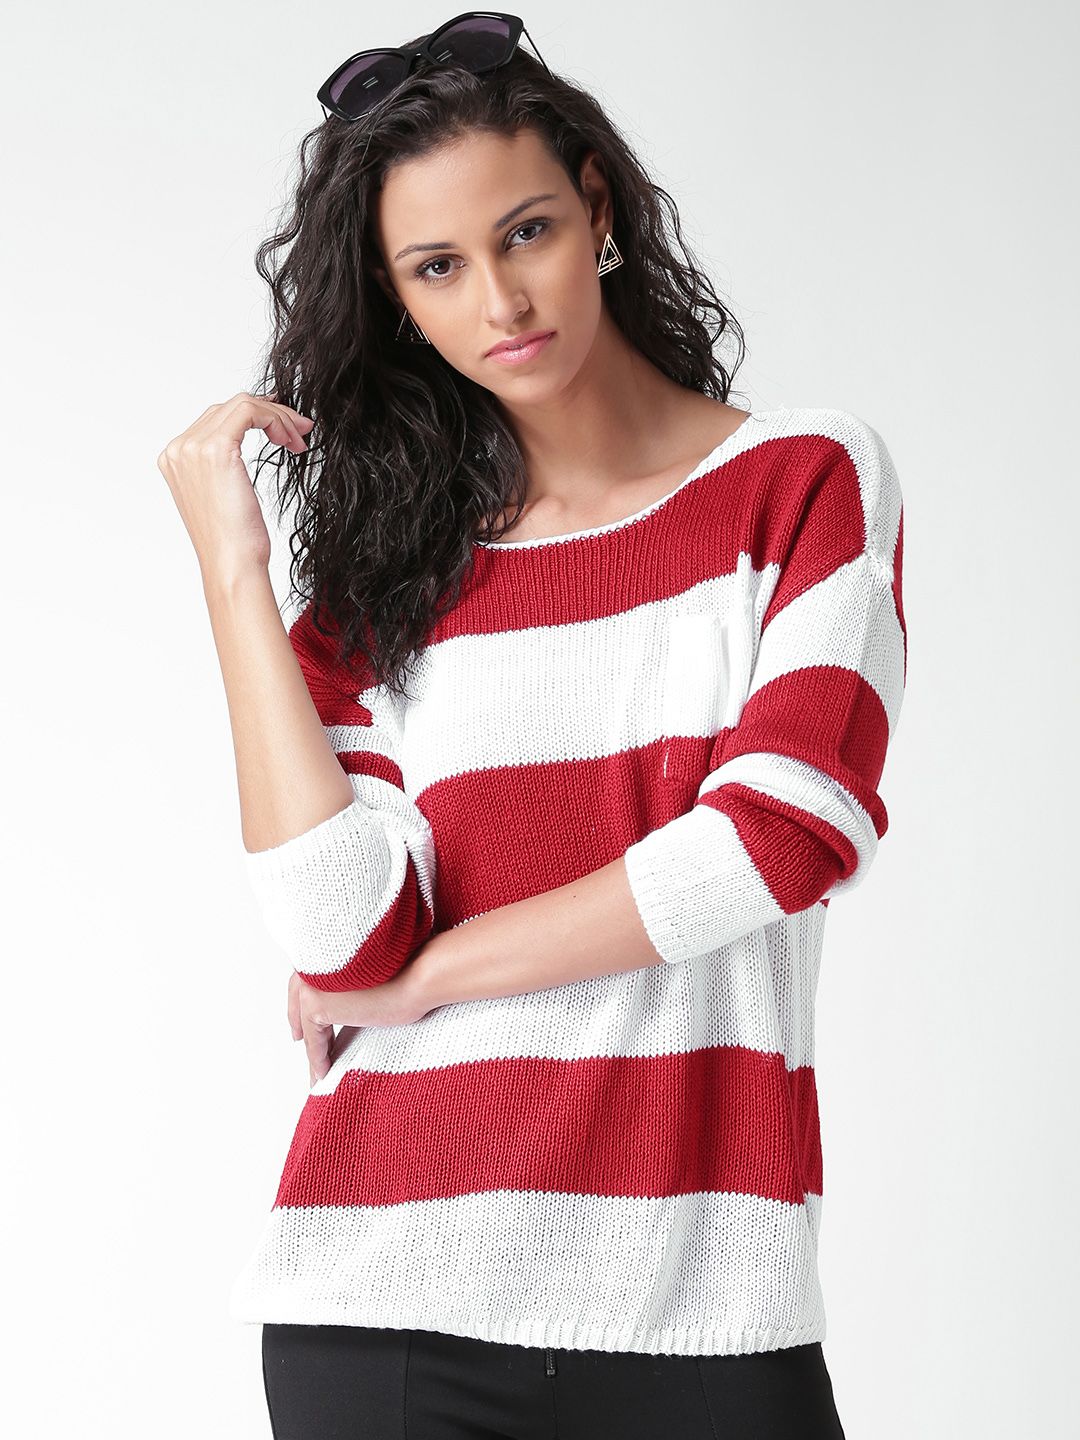 Red And White Striped Womens Sweater | Her Sweater